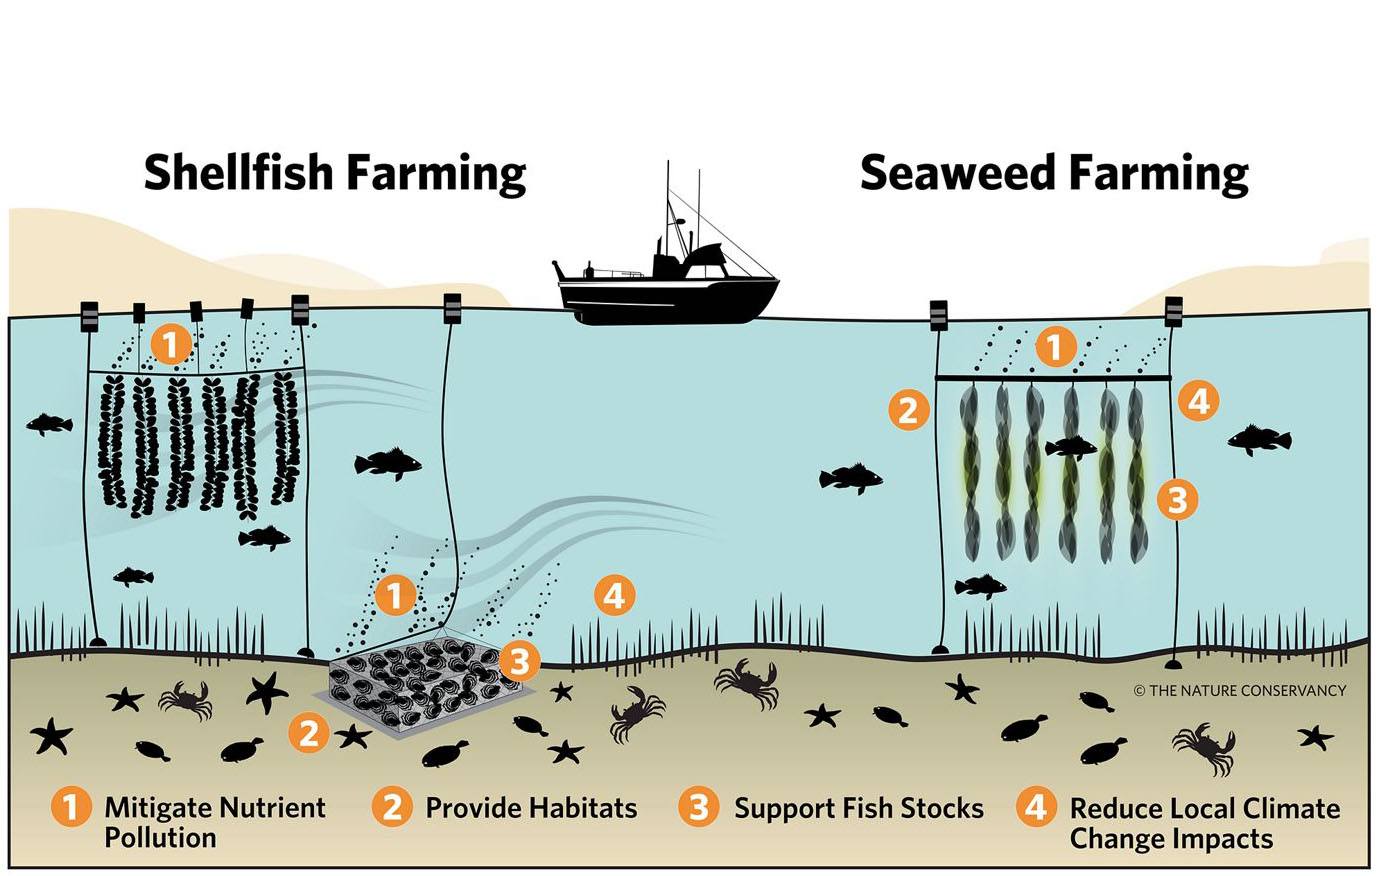 Fig. 2. how growing kelp can benefit shellfish aquaculture as well as natural ecosystems (Image: The Nature Conservancy)